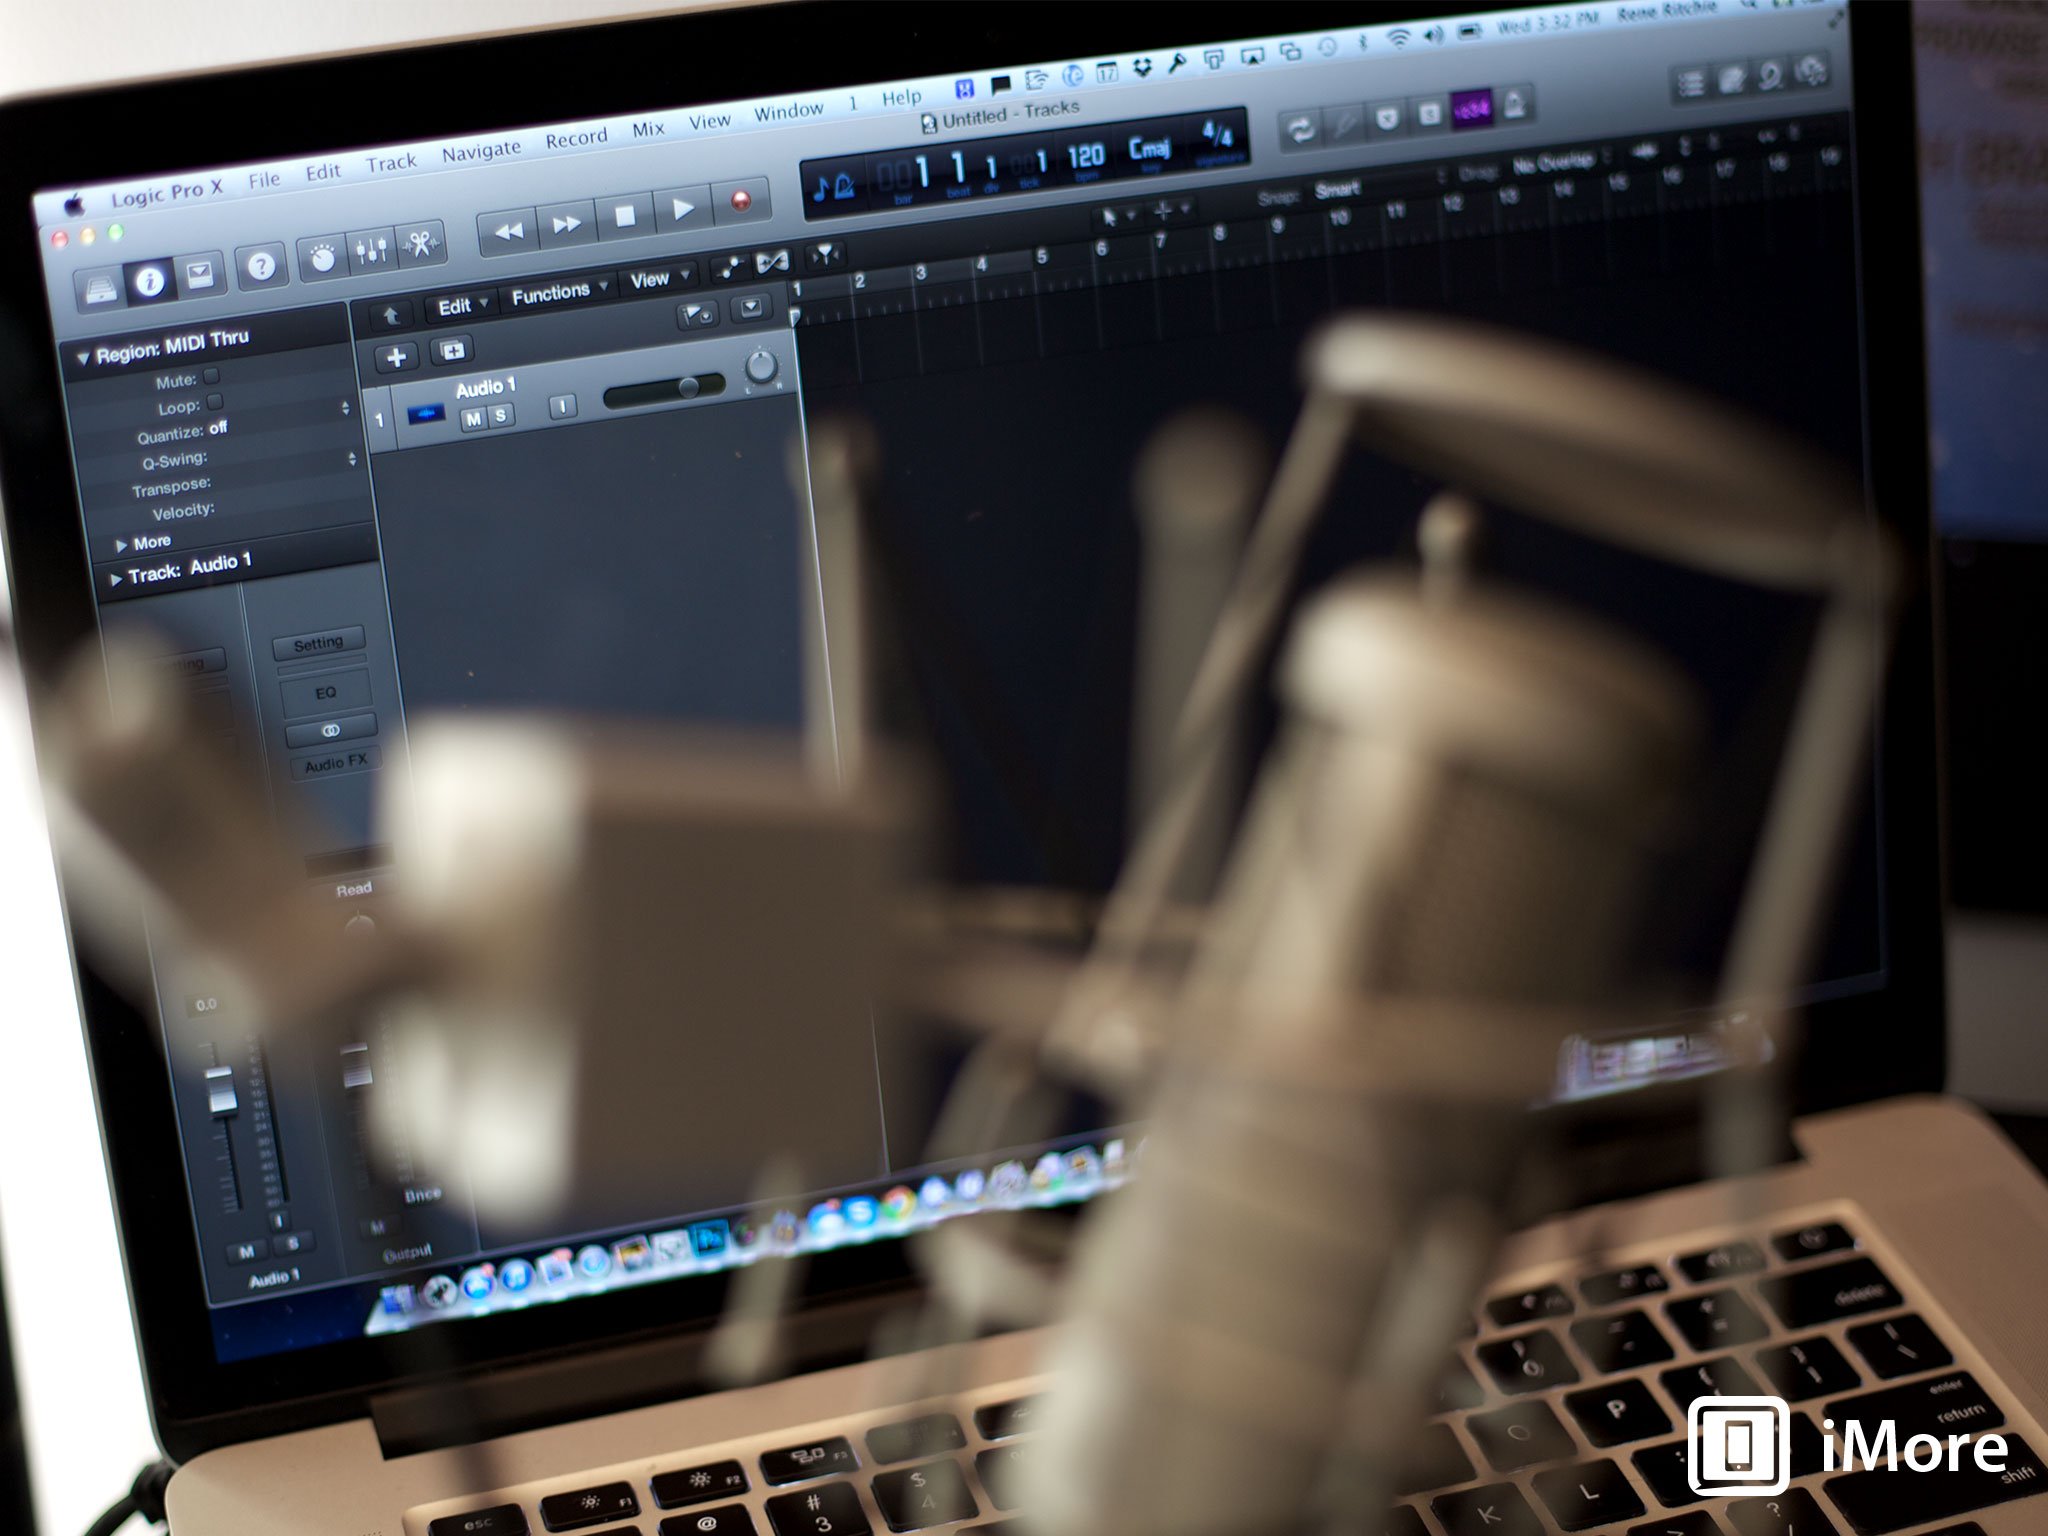 Logic Pro X gets updated, adds new Drummers, more